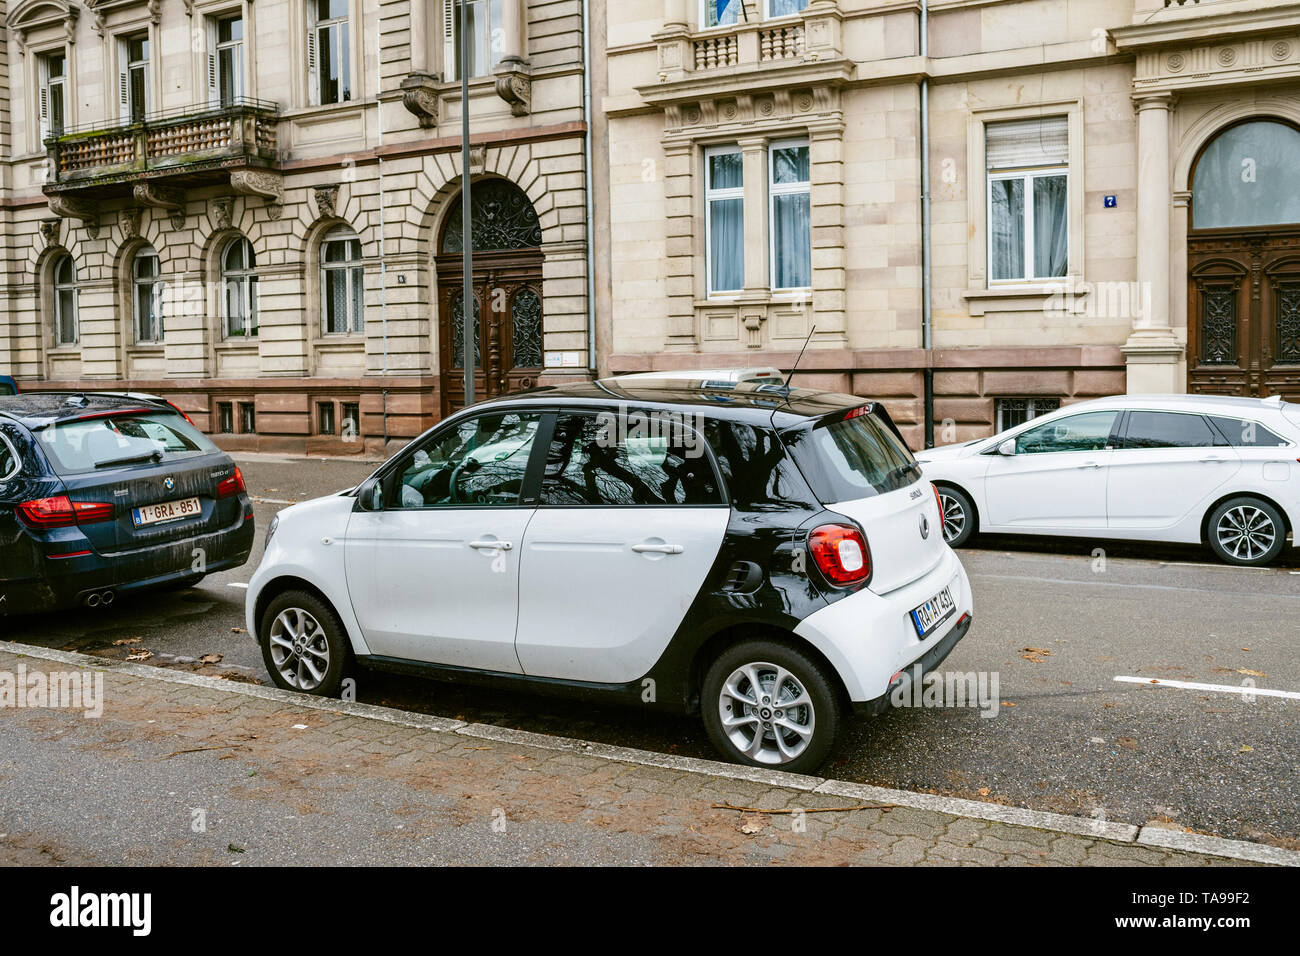 Strasbourg, France - Dec 27, 2017: Parked in the street white Mercedes Smart car - french apartment buildings in the background Stock Photo